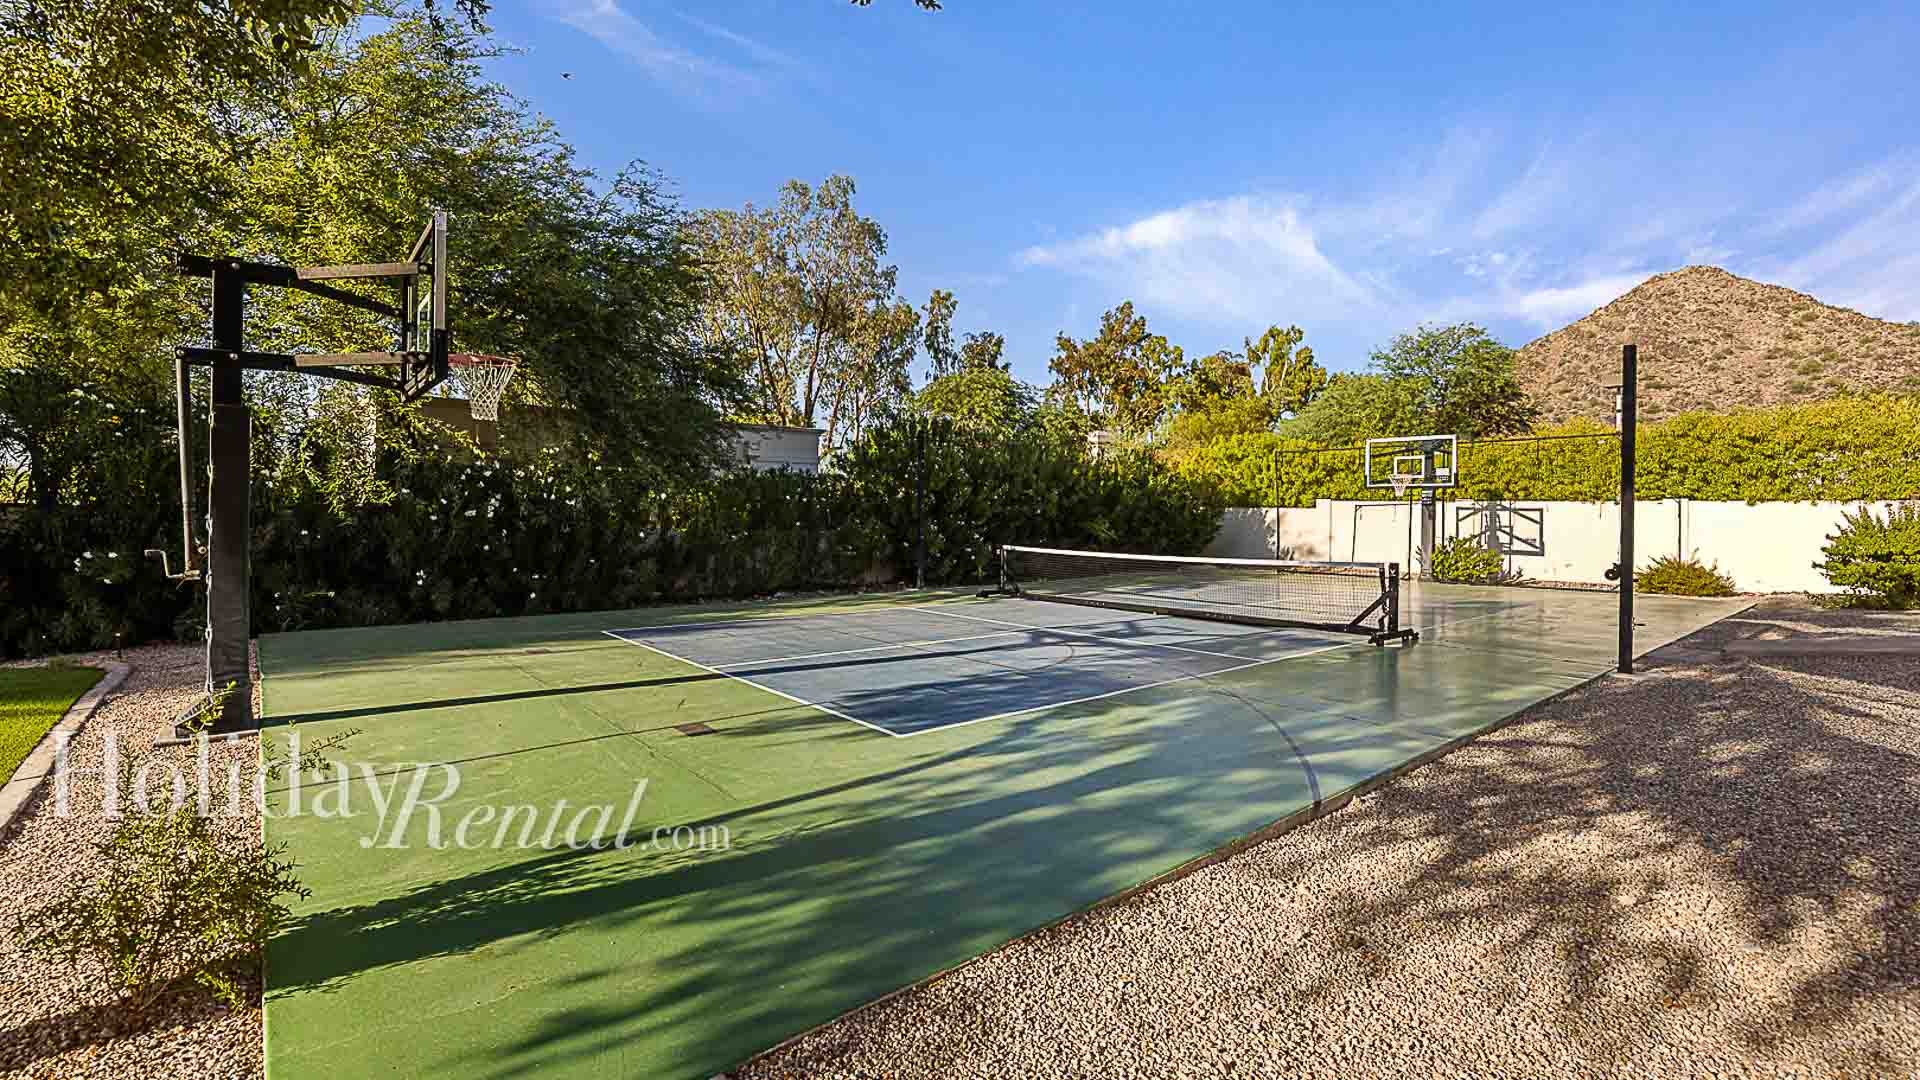 Amazing sports court designed for basketball and pickleball with mountain views.